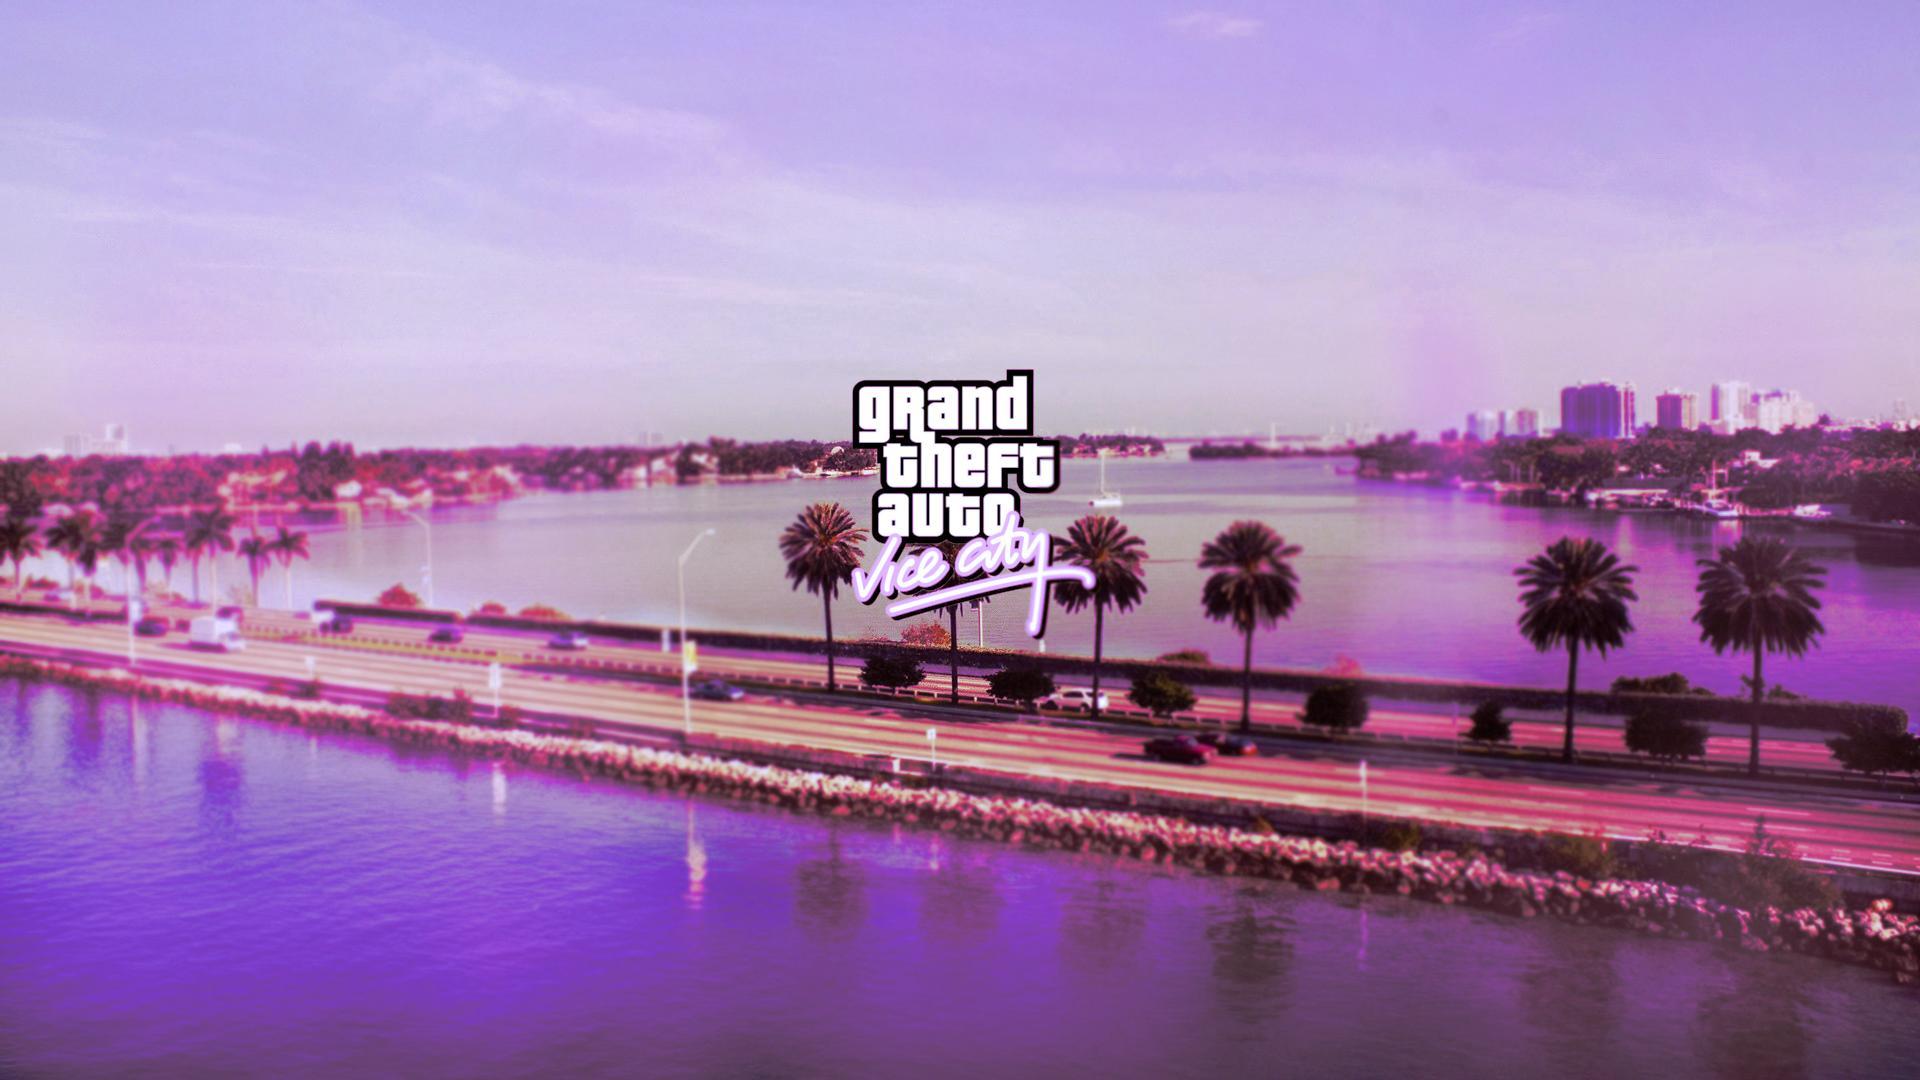 GTA Vice City Wallpapers I made for my friend